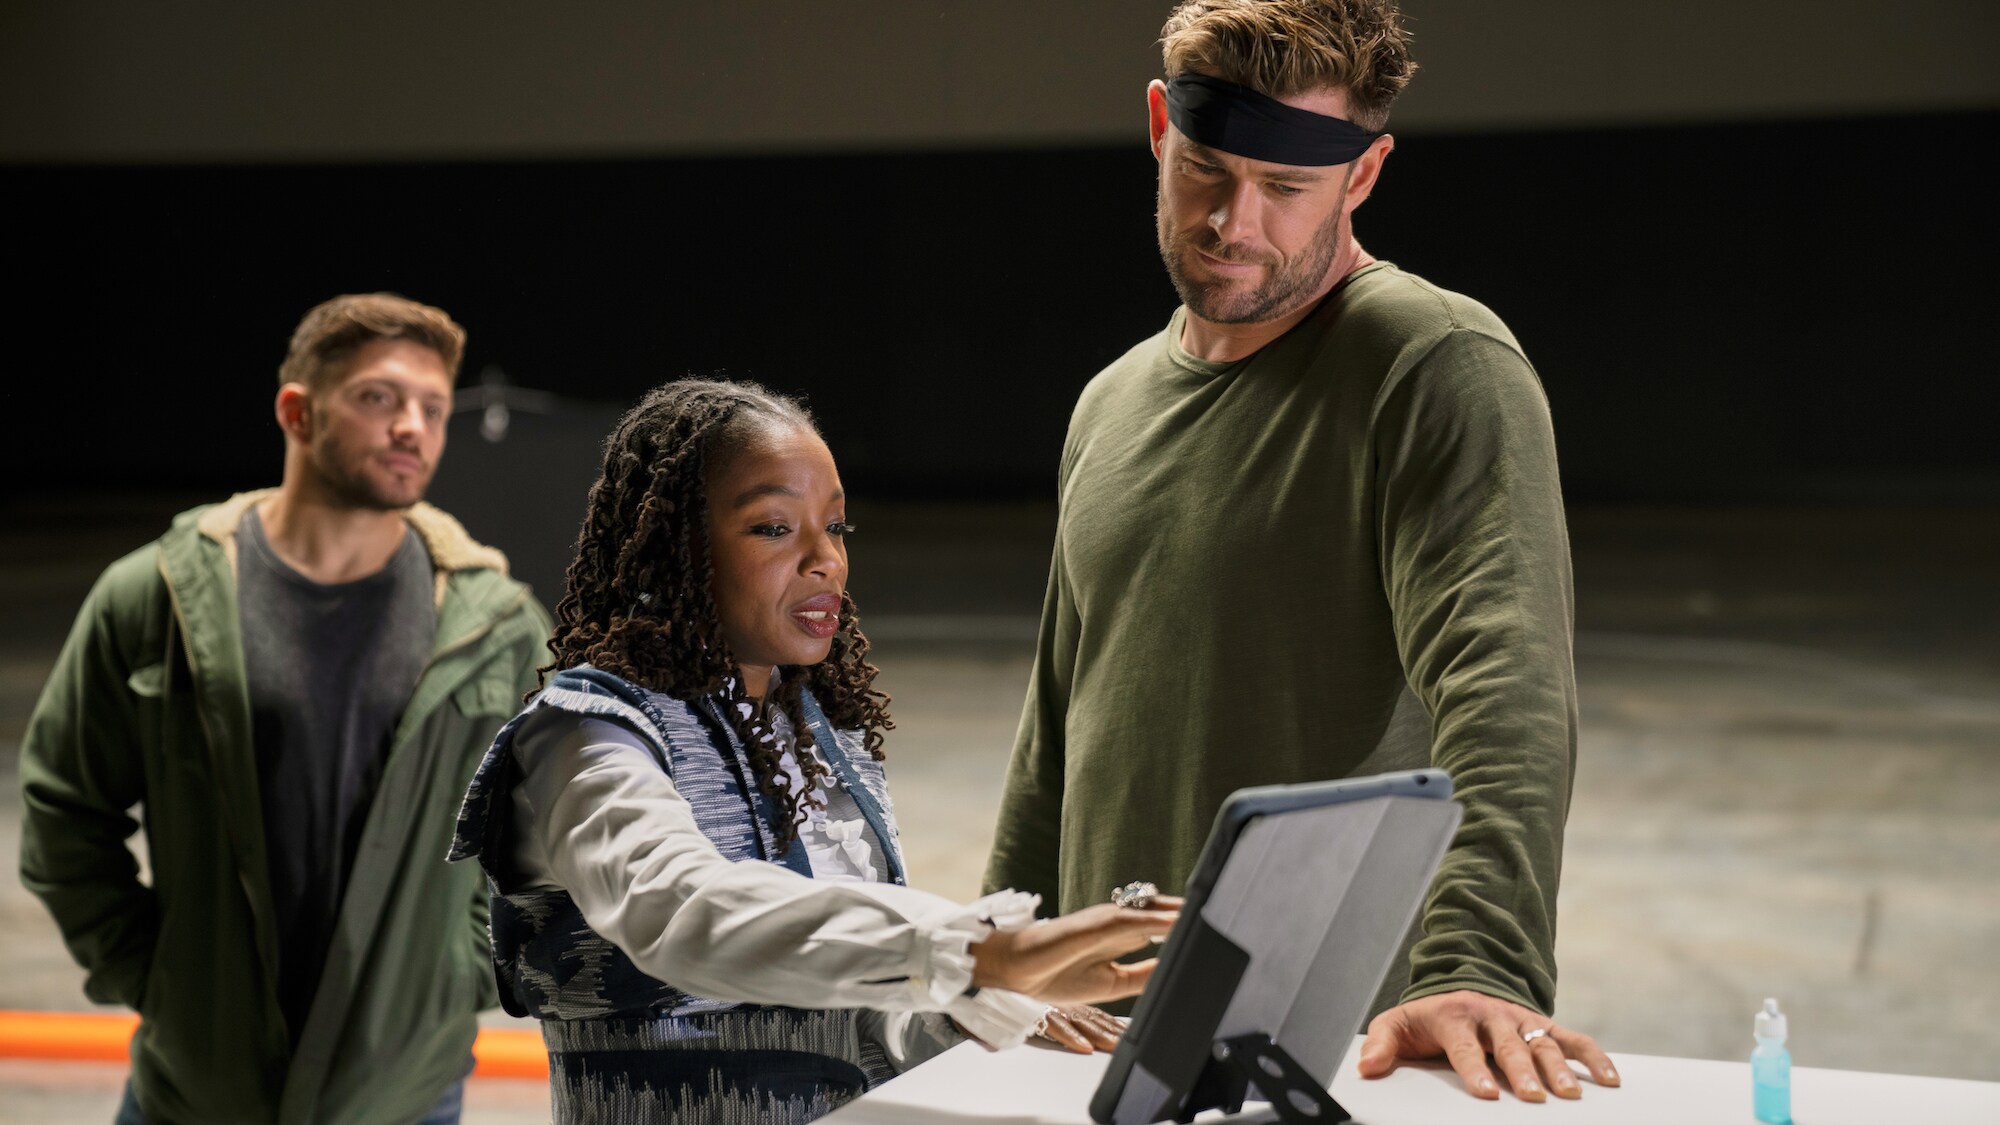 Luke Zocchi watches as Dr. Modupe Akinola measures Chris's physiological responses. (National Geographic for Disney+/Craig Parry)